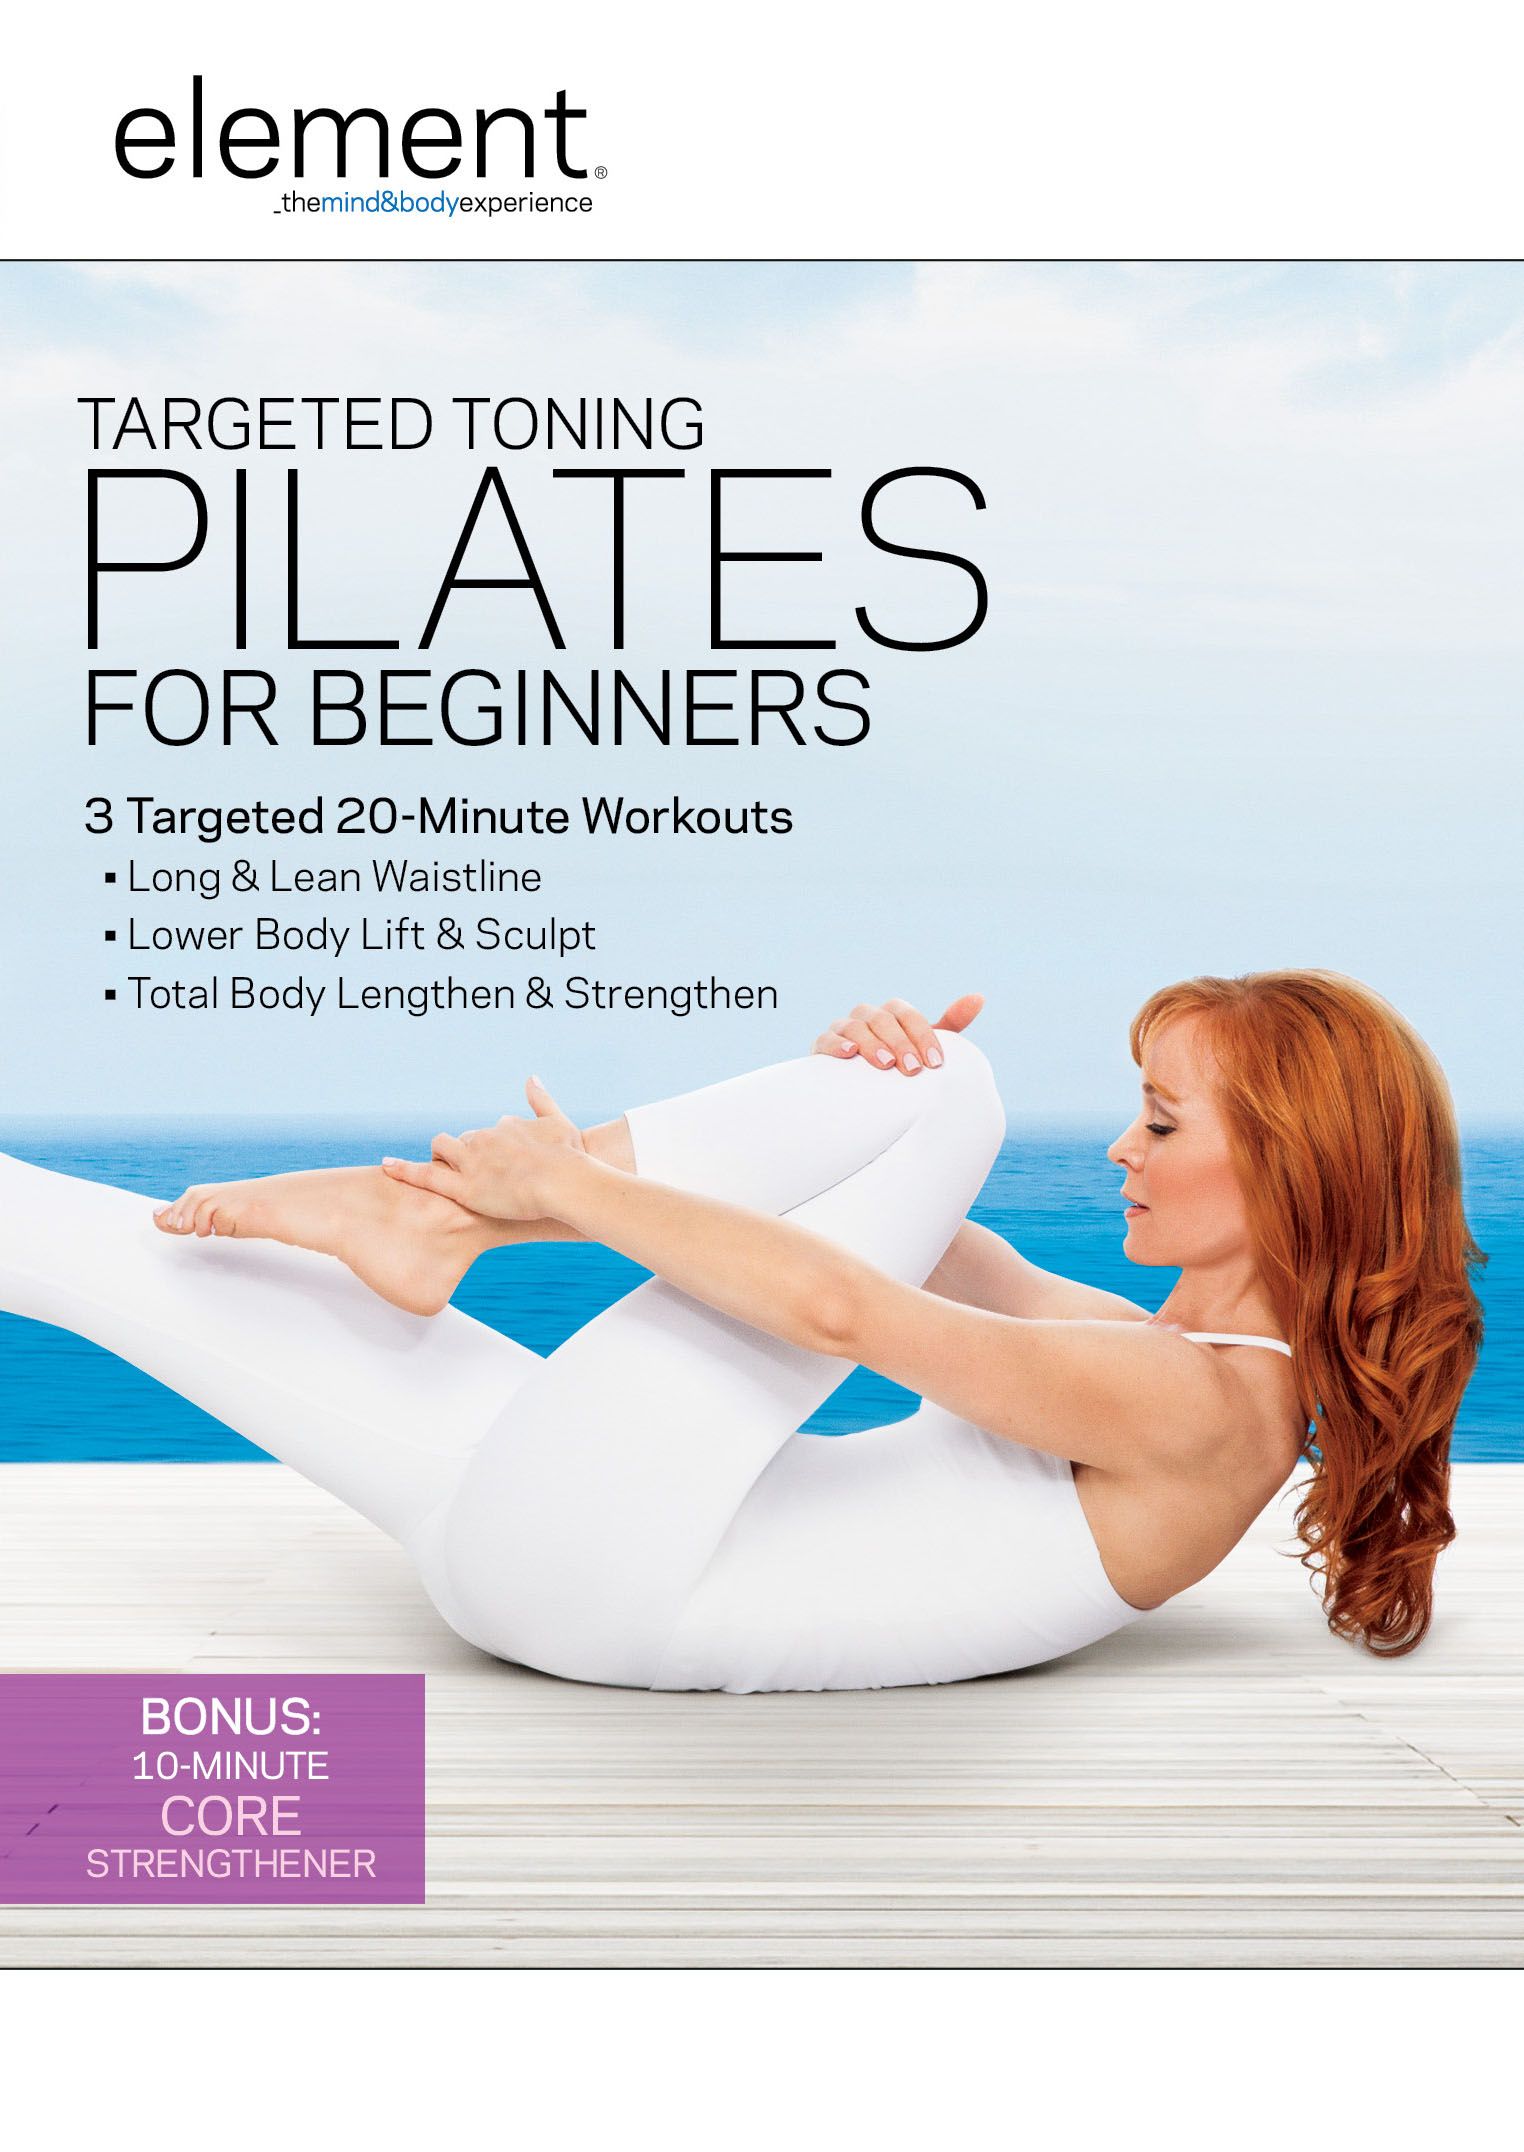 Element: Targeted Toning Pilates for Beginners - Best Buy